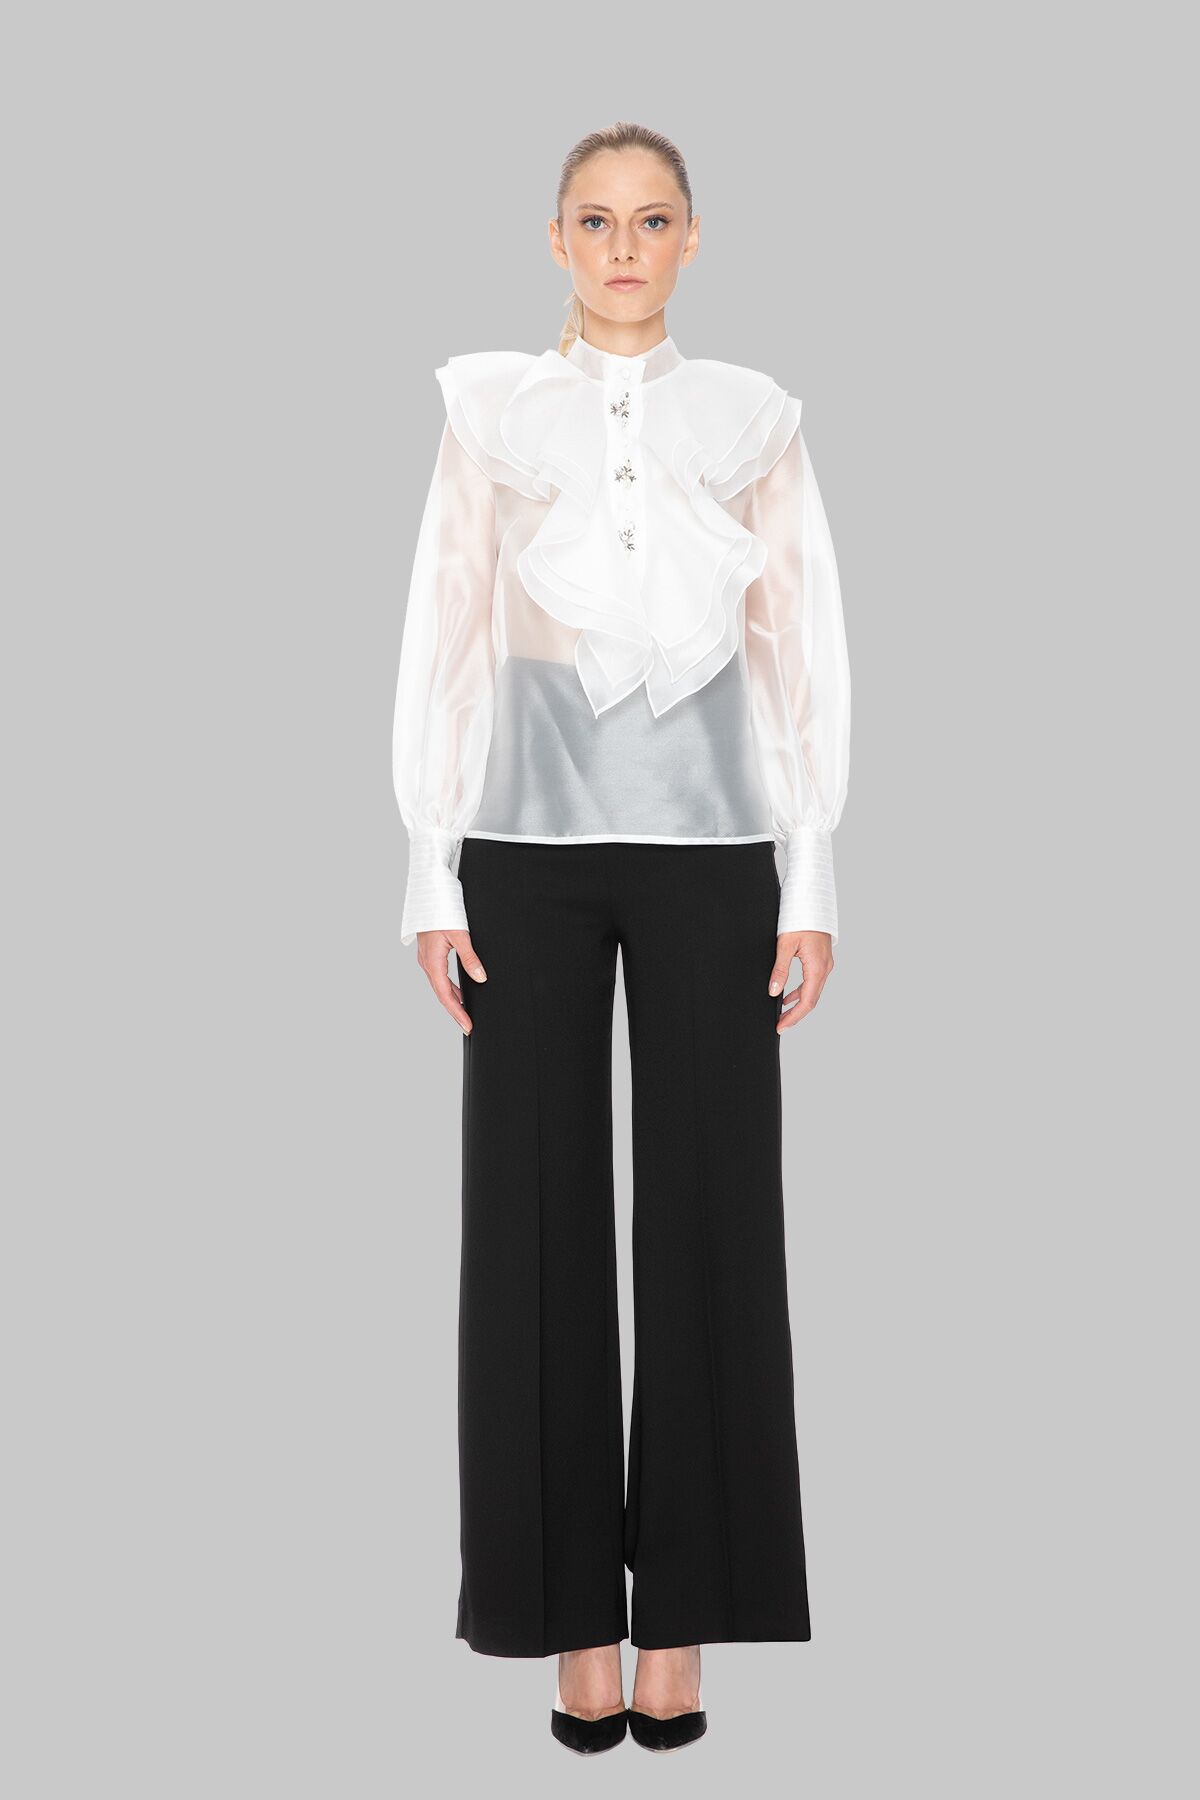  GIZIA - Ruffle Collar And Embroidered Detailed Organza Blouse